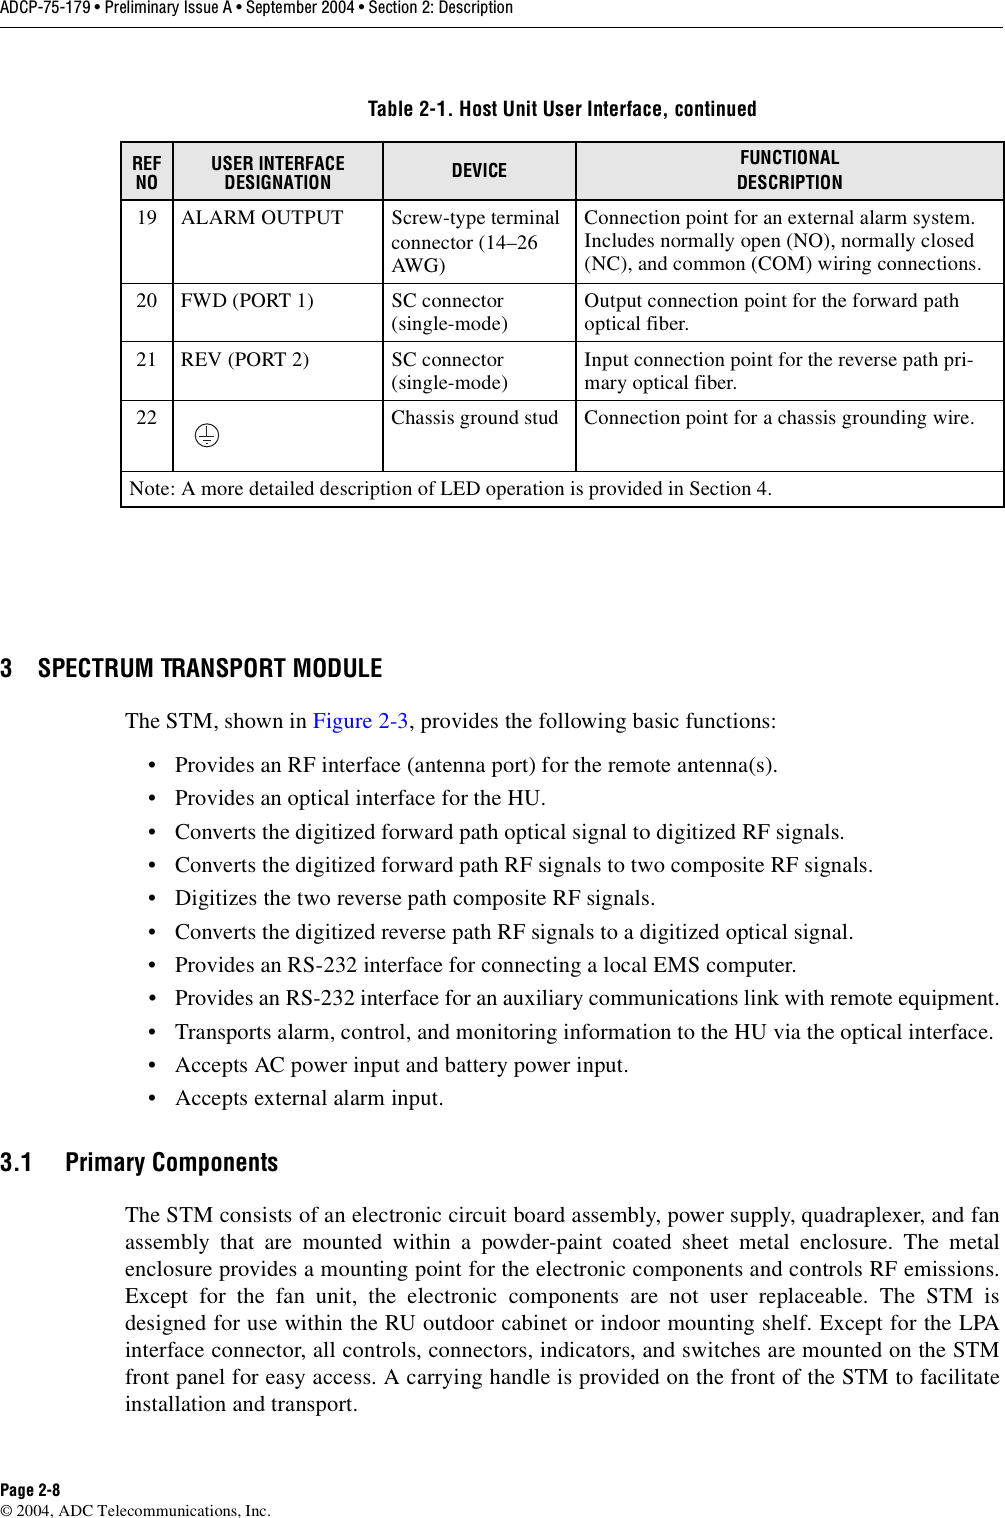 ADCP-75-179 • Preliminary Issue A • September 2004 • Section 2: DescriptionPage 2-8© 2004, ADC Telecommunications, Inc.3 SPECTRUM TRANSPORT MODULEThe STM, shown in Figure 2-3, provides the following basic functions:• Provides an RF interface (antenna port) for the remote antenna(s). • Provides an optical interface for the HU. • Converts the digitized forward path optical signal to digitized RF signals. • Converts the digitized forward path RF signals to two composite RF signals. • Digitizes the two reverse path composite RF signals. • Converts the digitized reverse path RF signals to a digitized optical signal. • Provides an RS-232 interface for connecting a local EMS computer. • Provides an RS-232 interface for an auxiliary communications link with remote equipment.• Transports alarm, control, and monitoring information to the HU via the optical interface. • Accepts AC power input and battery power input.• Accepts external alarm input. 3.1 Primary ComponentsThe STM consists of an electronic circuit board assembly, power supply, quadraplexer, and fanassembly that are mounted within a powder-paint coated sheet metal enclosure. The metalenclosure provides a mounting point for the electronic components and controls RF emissions.Except for the fan unit, the electronic components are not user replaceable. The STM isdesigned for use within the RU outdoor cabinet or indoor mounting shelf. Except for the LPAinterface connector, all controls, connectors, indicators, and switches are mounted on the STMfront panel for easy access. A carrying handle is provided on the front of the STM to facilitateinstallation and transport. 19 ALARM OUTPUT Screw-type terminalconnector (14–26 AWG)Connection point for an external alarm system. Includes normally open (NO), normally closed (NC), and common (COM) wiring connections. 20 FWD (PORT 1) SC connector(single-mode) Output connection point for the forward path optical fiber.21 REV (PORT 2) SC connector(single-mode) Input connection point for the reverse path pri-mary optical fiber.22 Chassis ground stud Connection point for a chassis grounding wire. Note: A more detailed description of LED operation is provided in Section 4. Table 2-1. Host Unit User Interface, continuedREF NOUSER INTERFACE DESIGNATION DEVICE FUNCTIONALDESCRIPTION